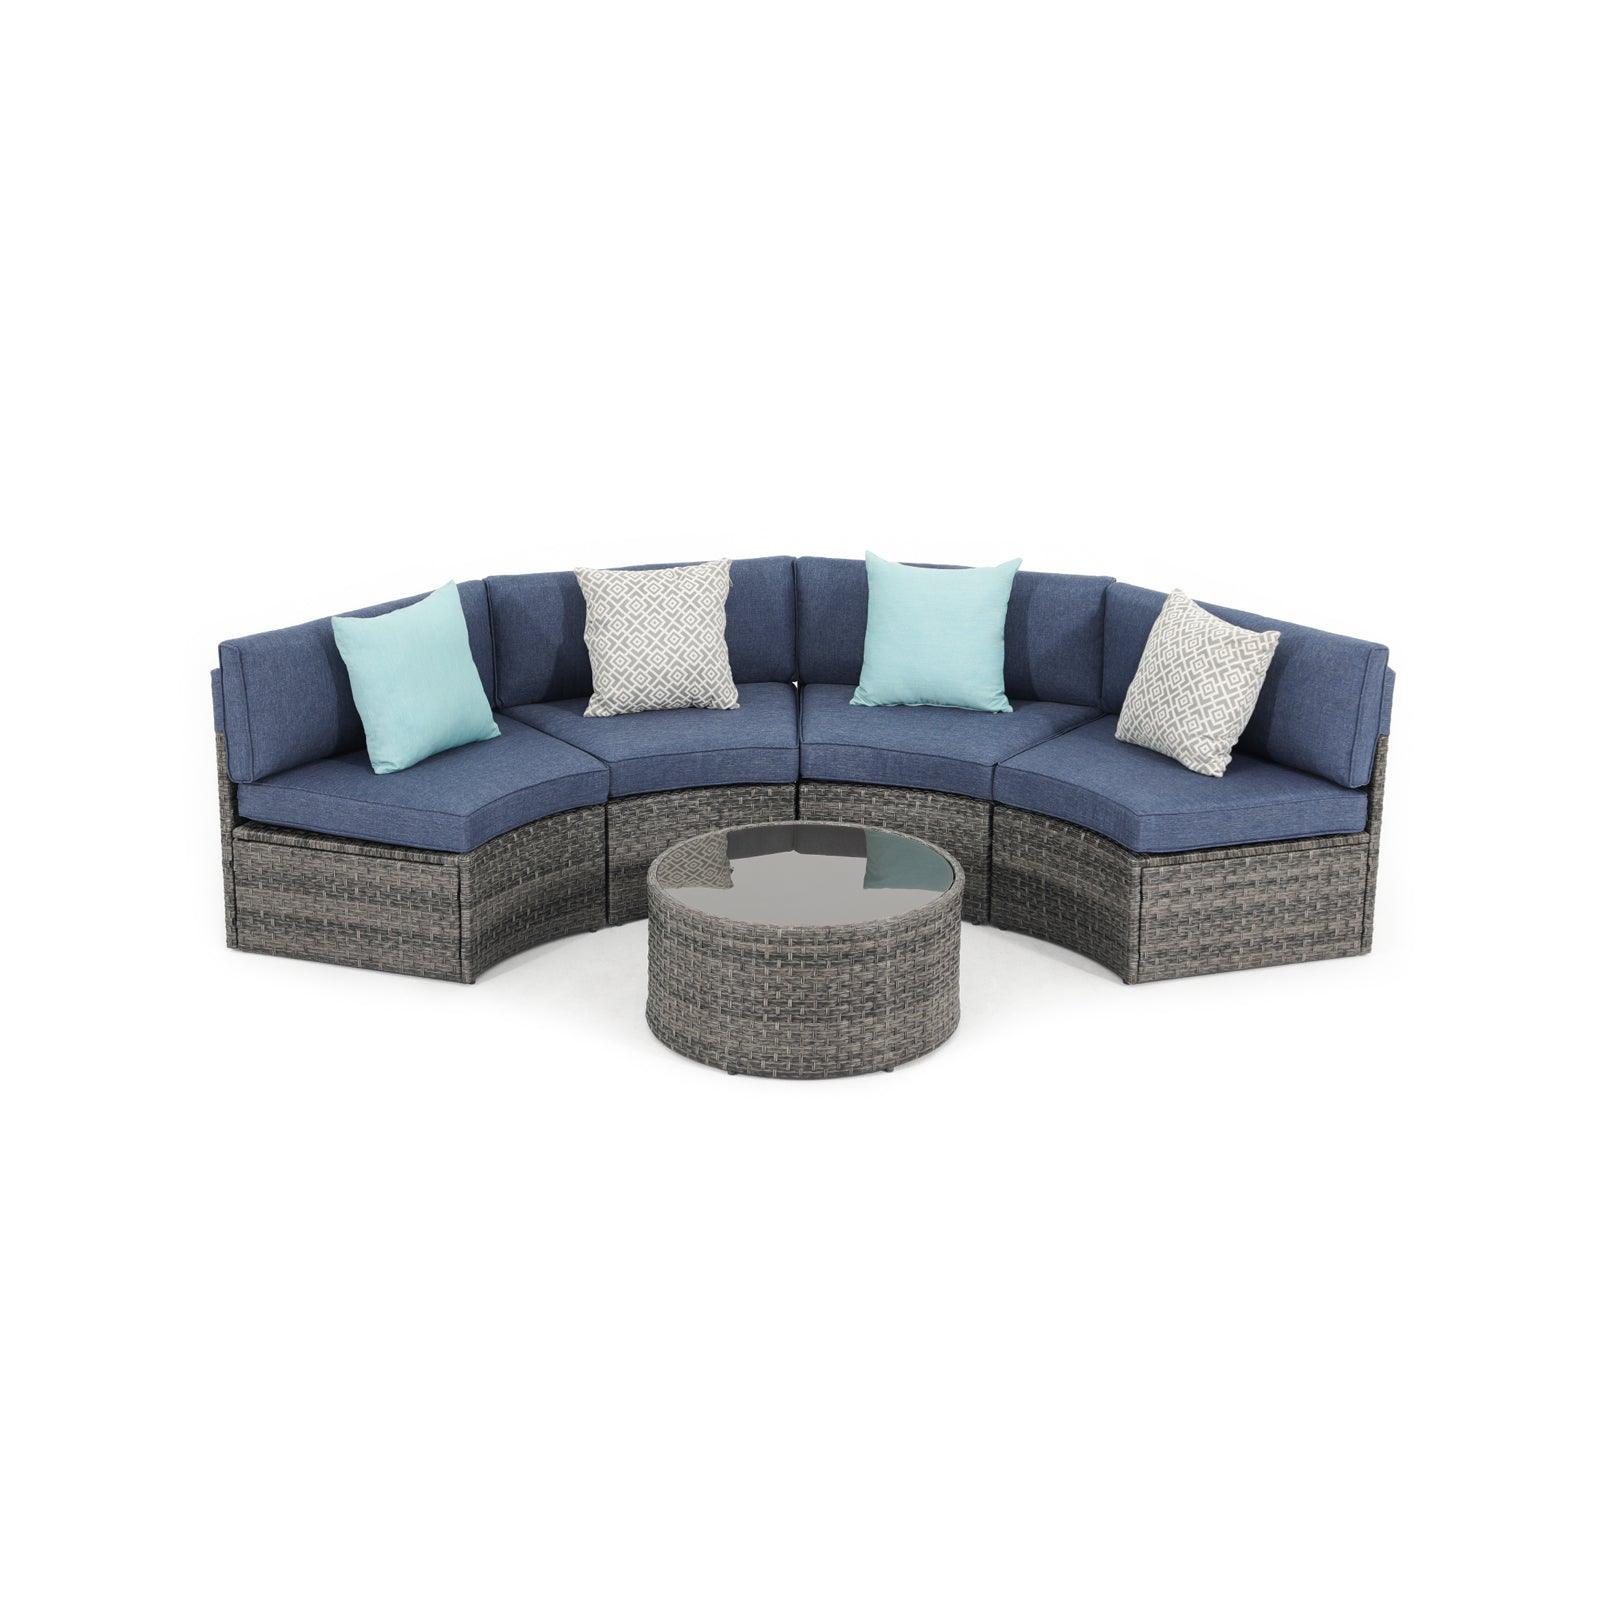 Boboli 5-piece Grey Wicker Curved Sectional Set with navy blue cushions, 1 Round Glass Table + 4 sectional sofas, front- Jardina Furniture #color_Navy Blue #piece_5-pc.